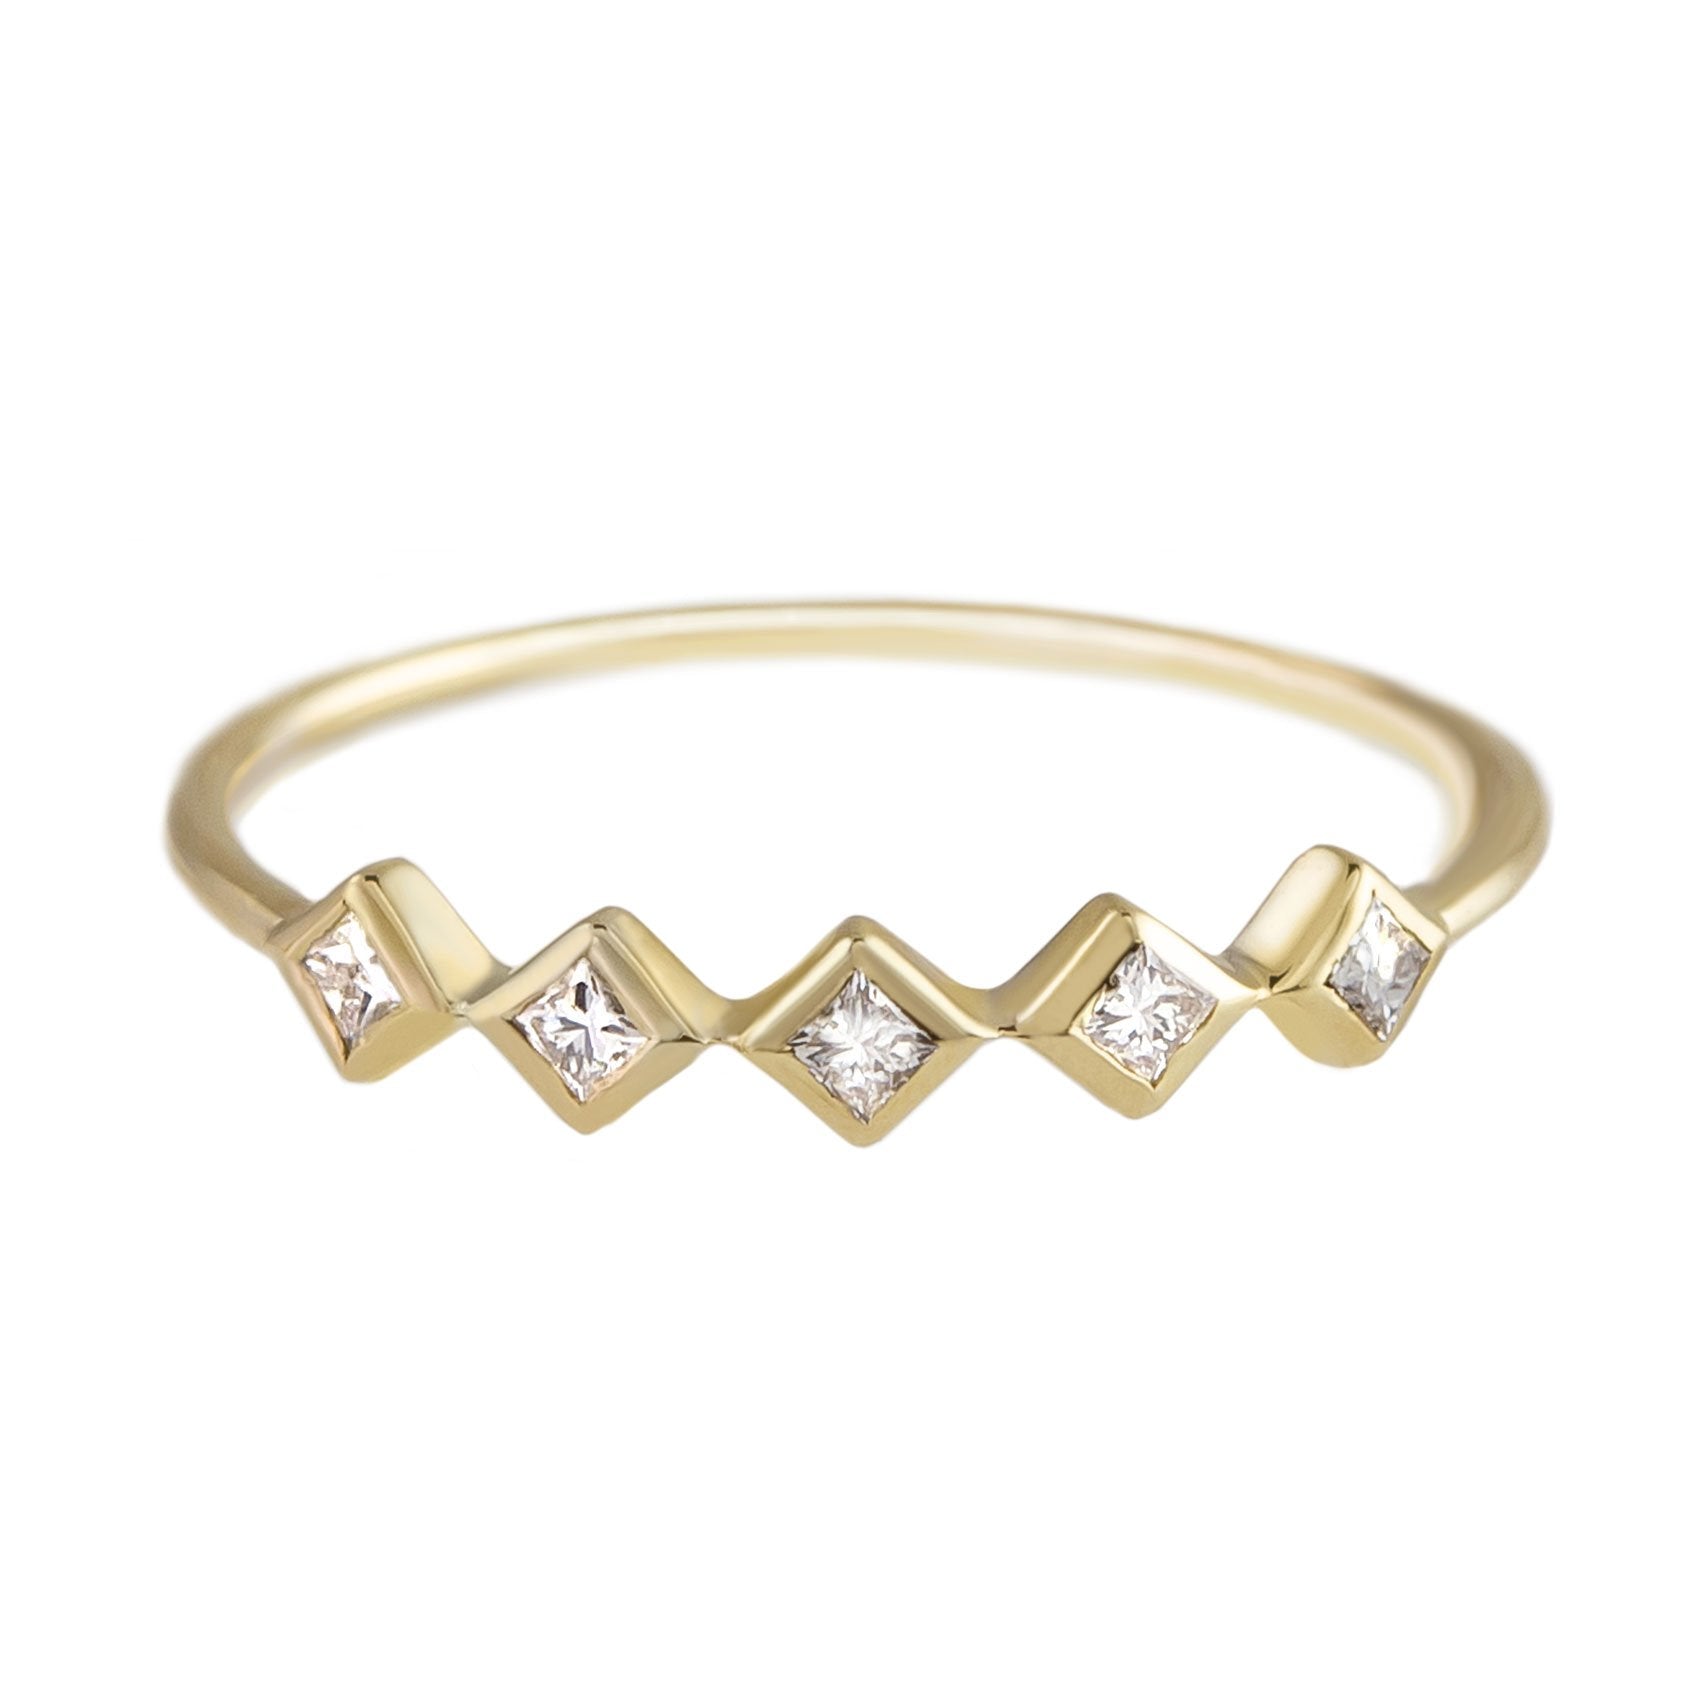 Metier by tomfoolery 5 Stone White Diamond Ring in 9ct Yellow Gold with Princess Diamonds